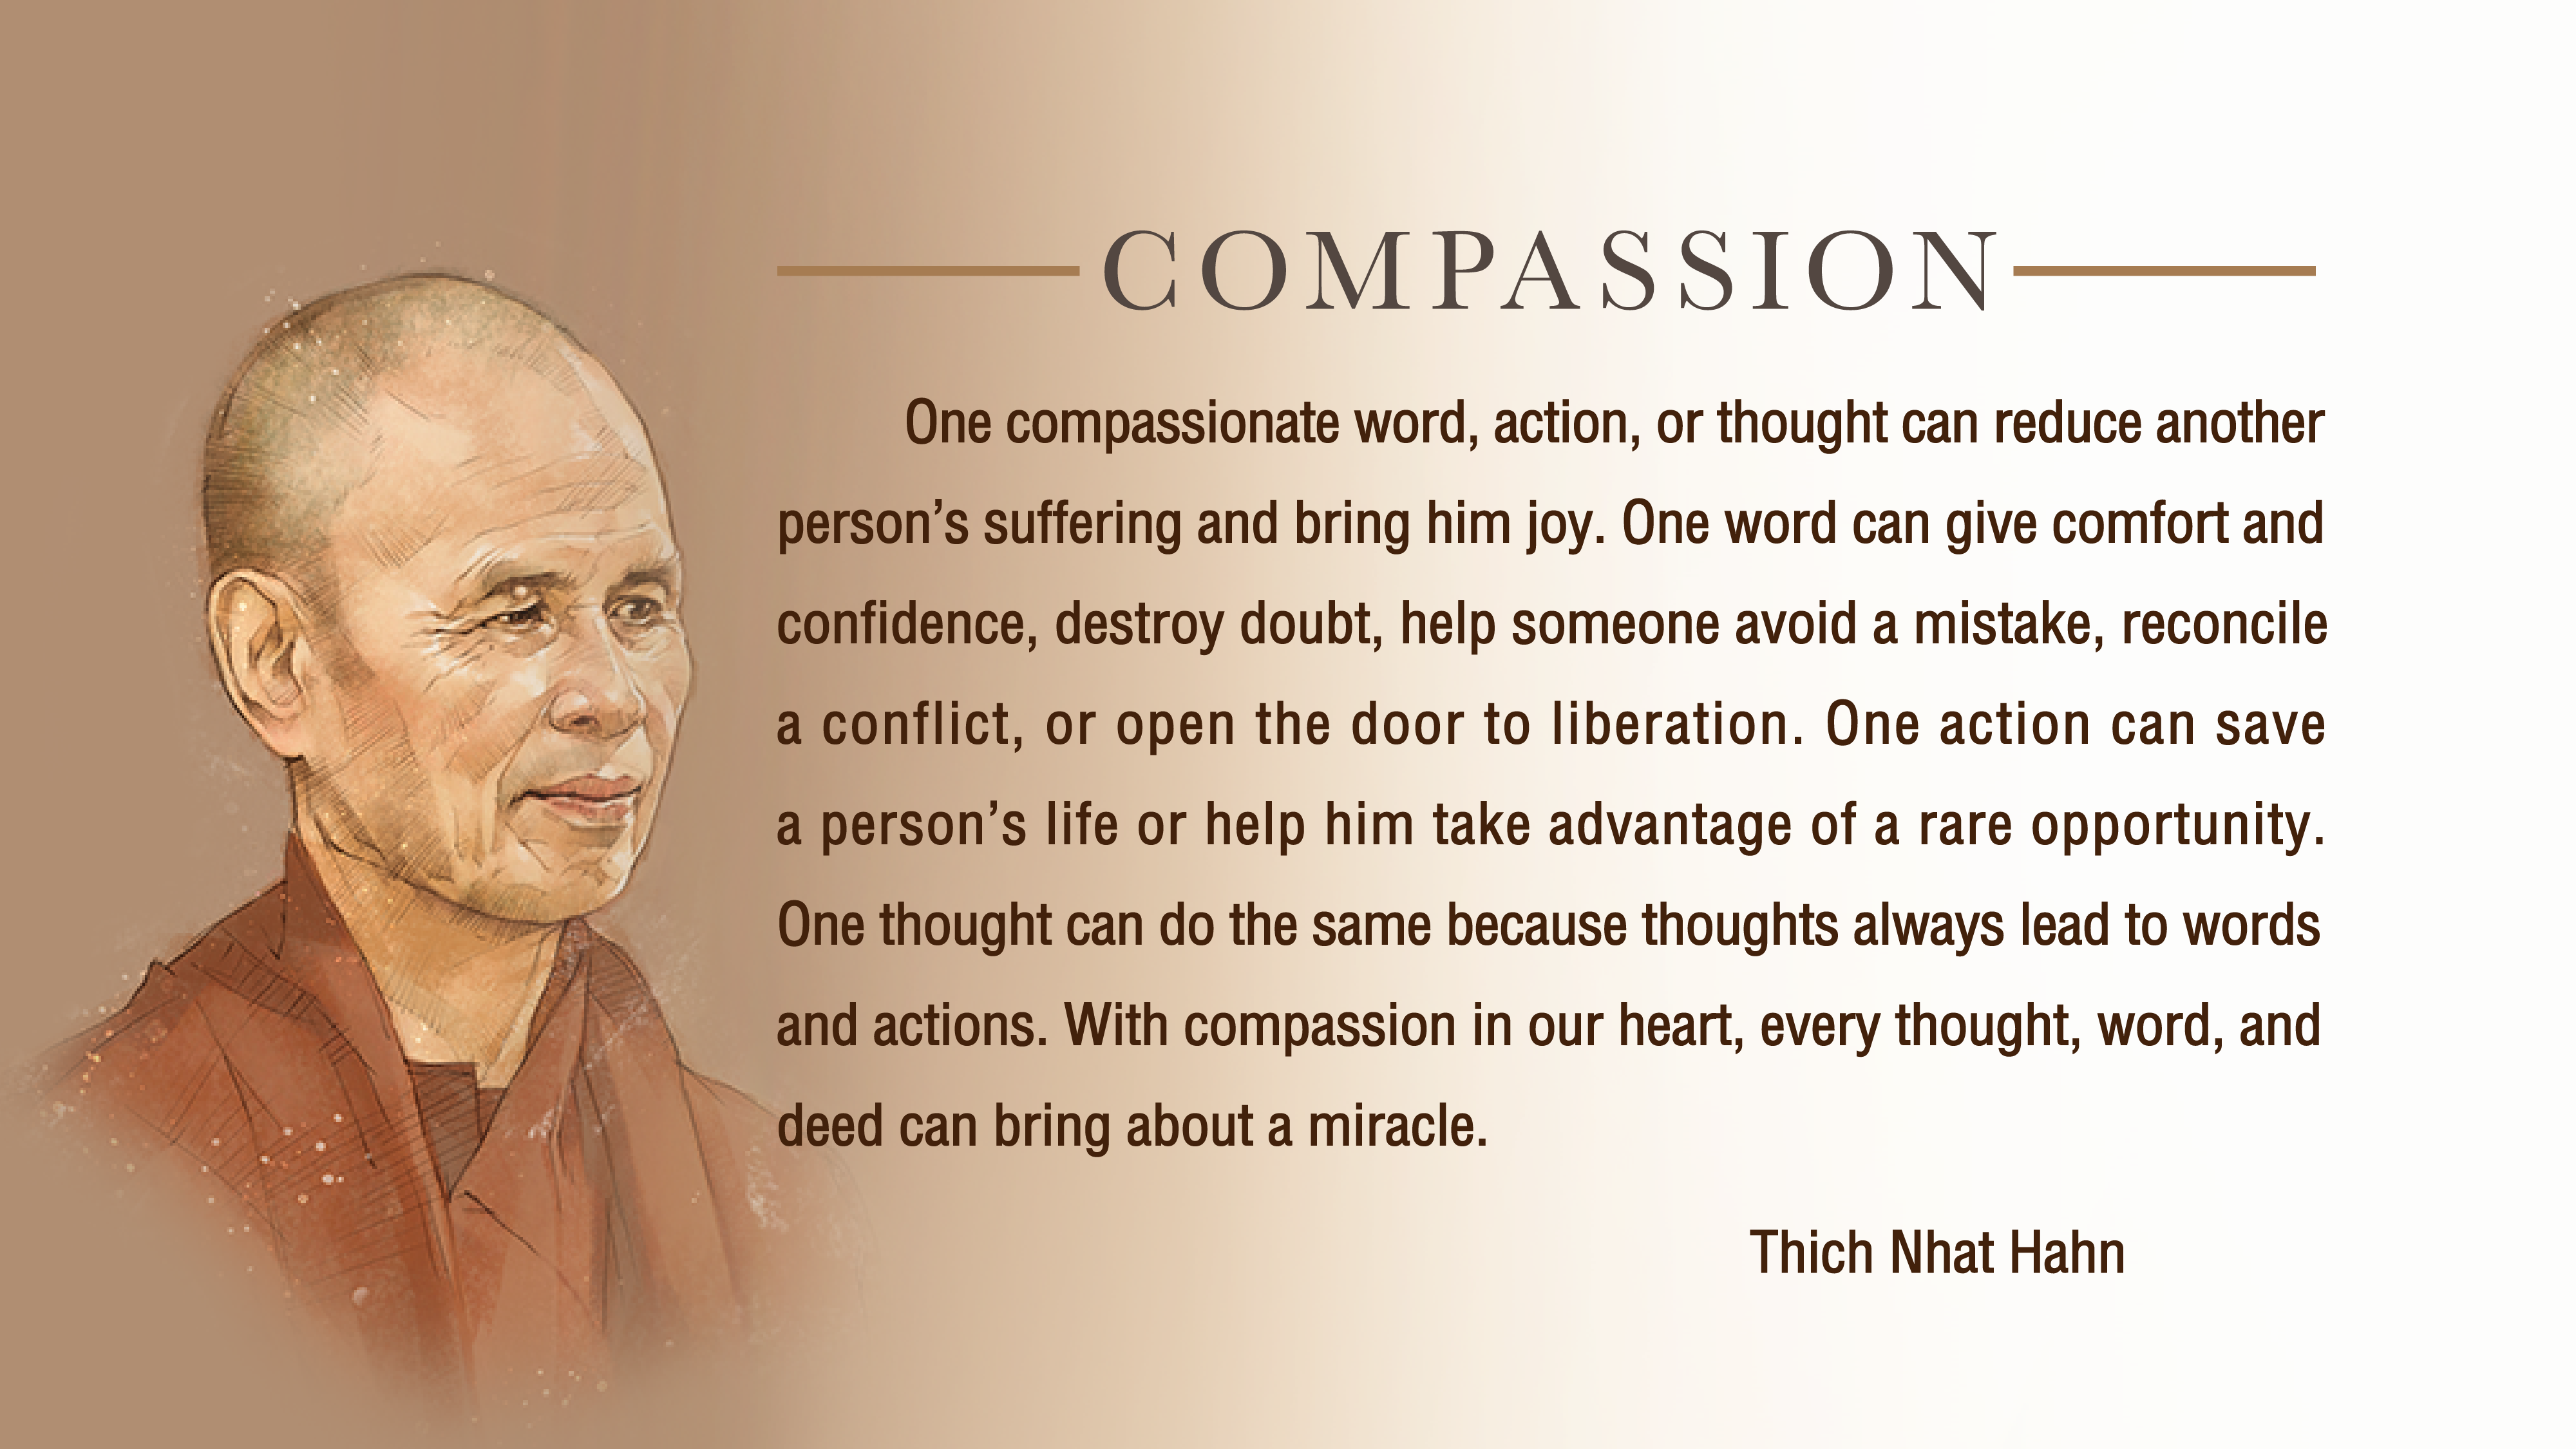 Compassion is an action word with no